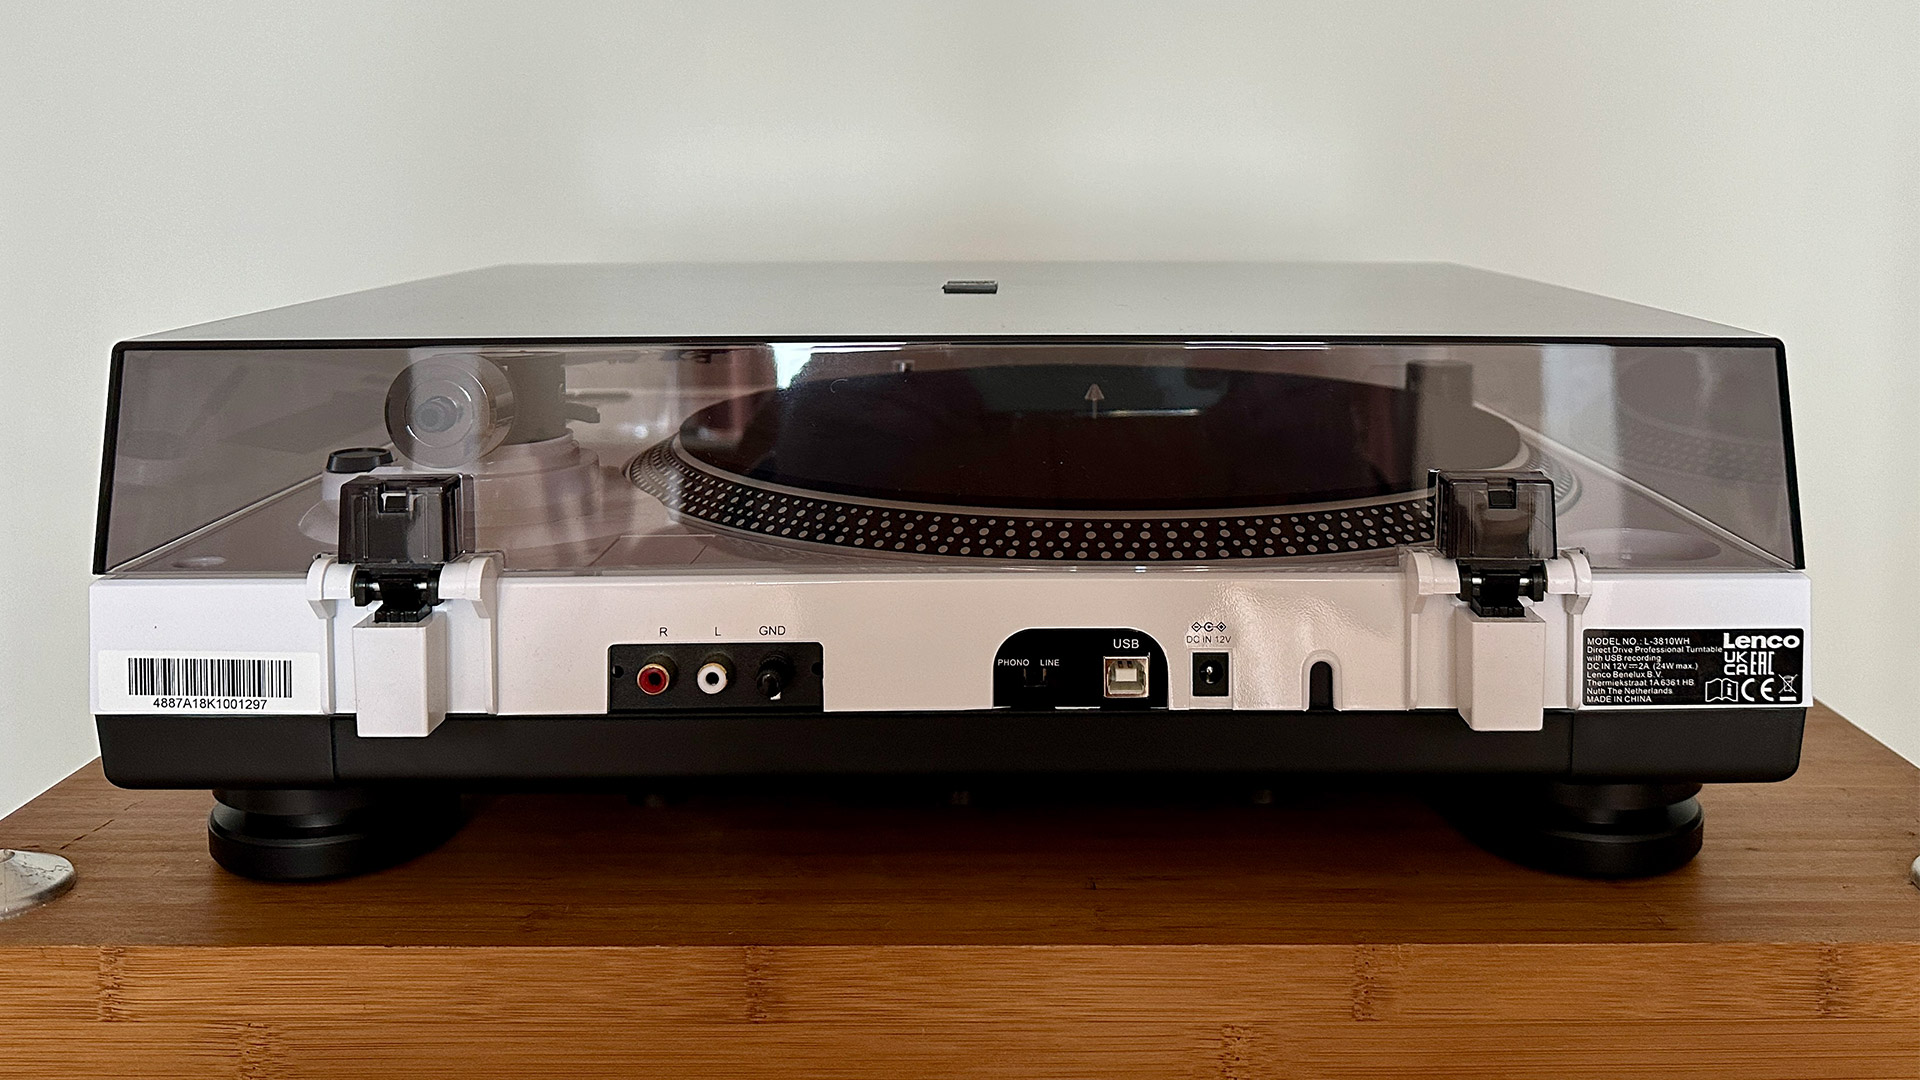 the back of the Lenco L-3810 turntable with its ports visible